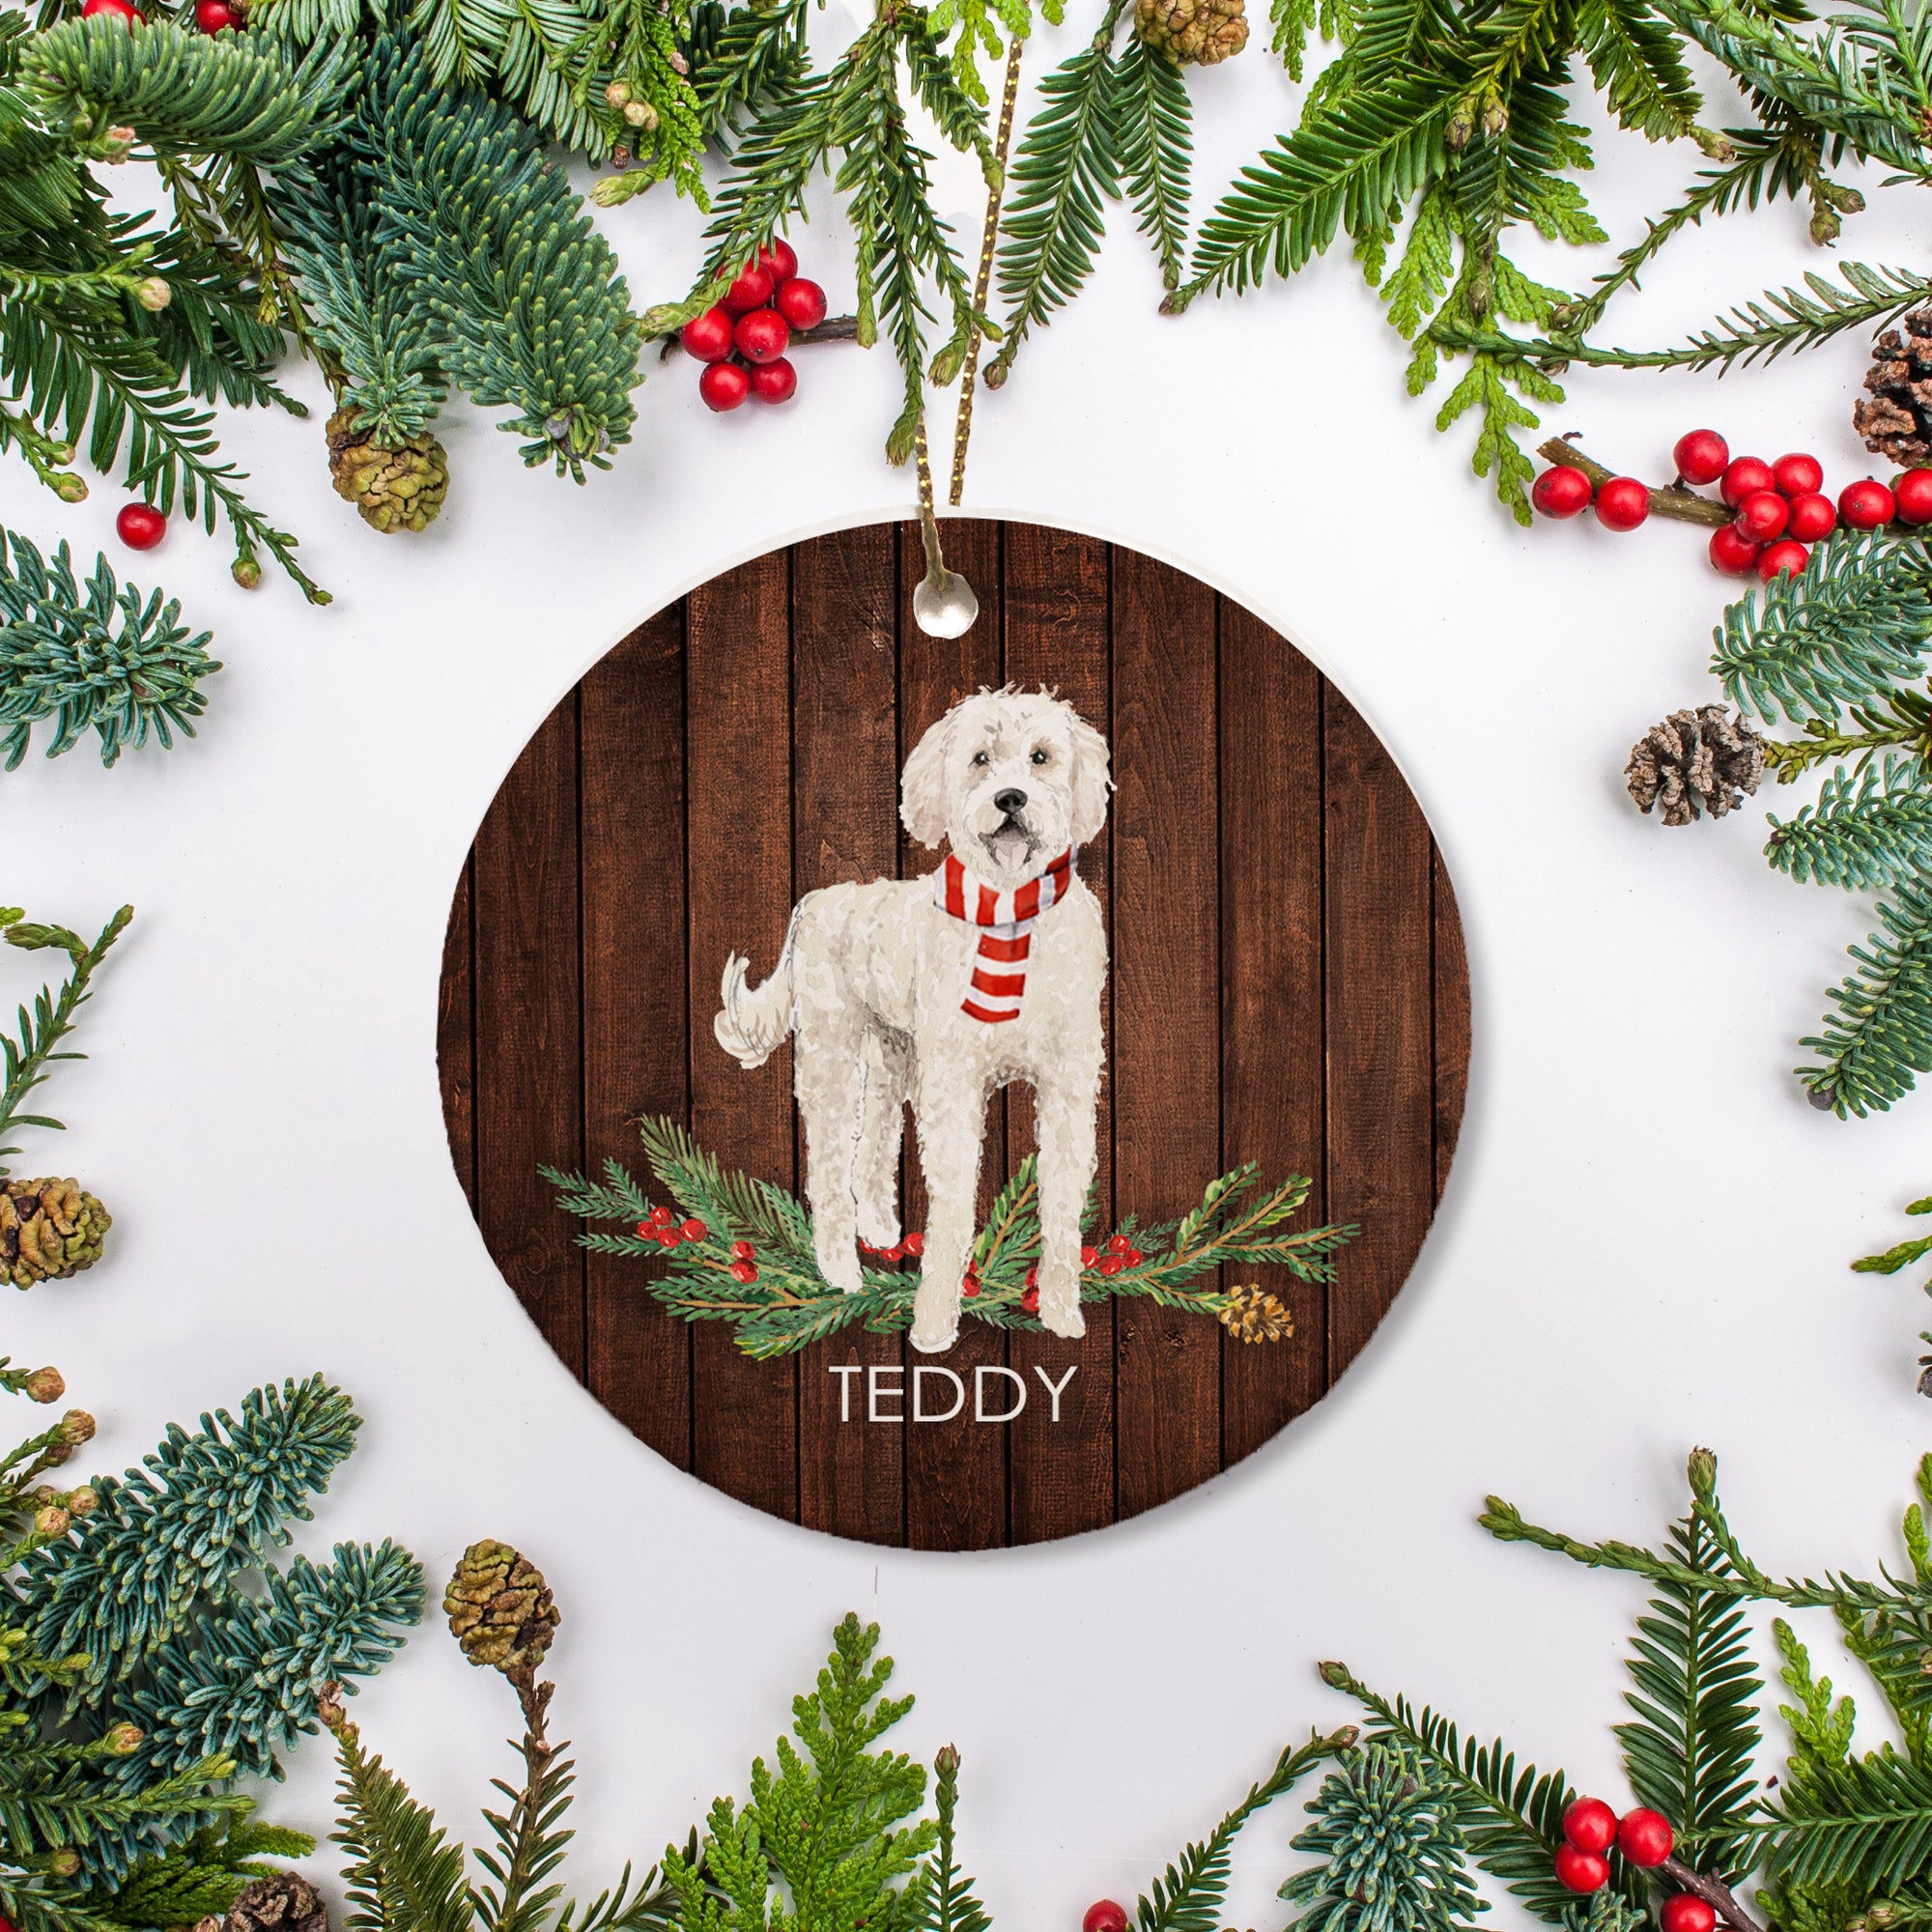 White Goldendoodle Christmas ornament standing on a patch of pine needles and berries. Personalize with the name and year of your choice. | PIPSY.COM